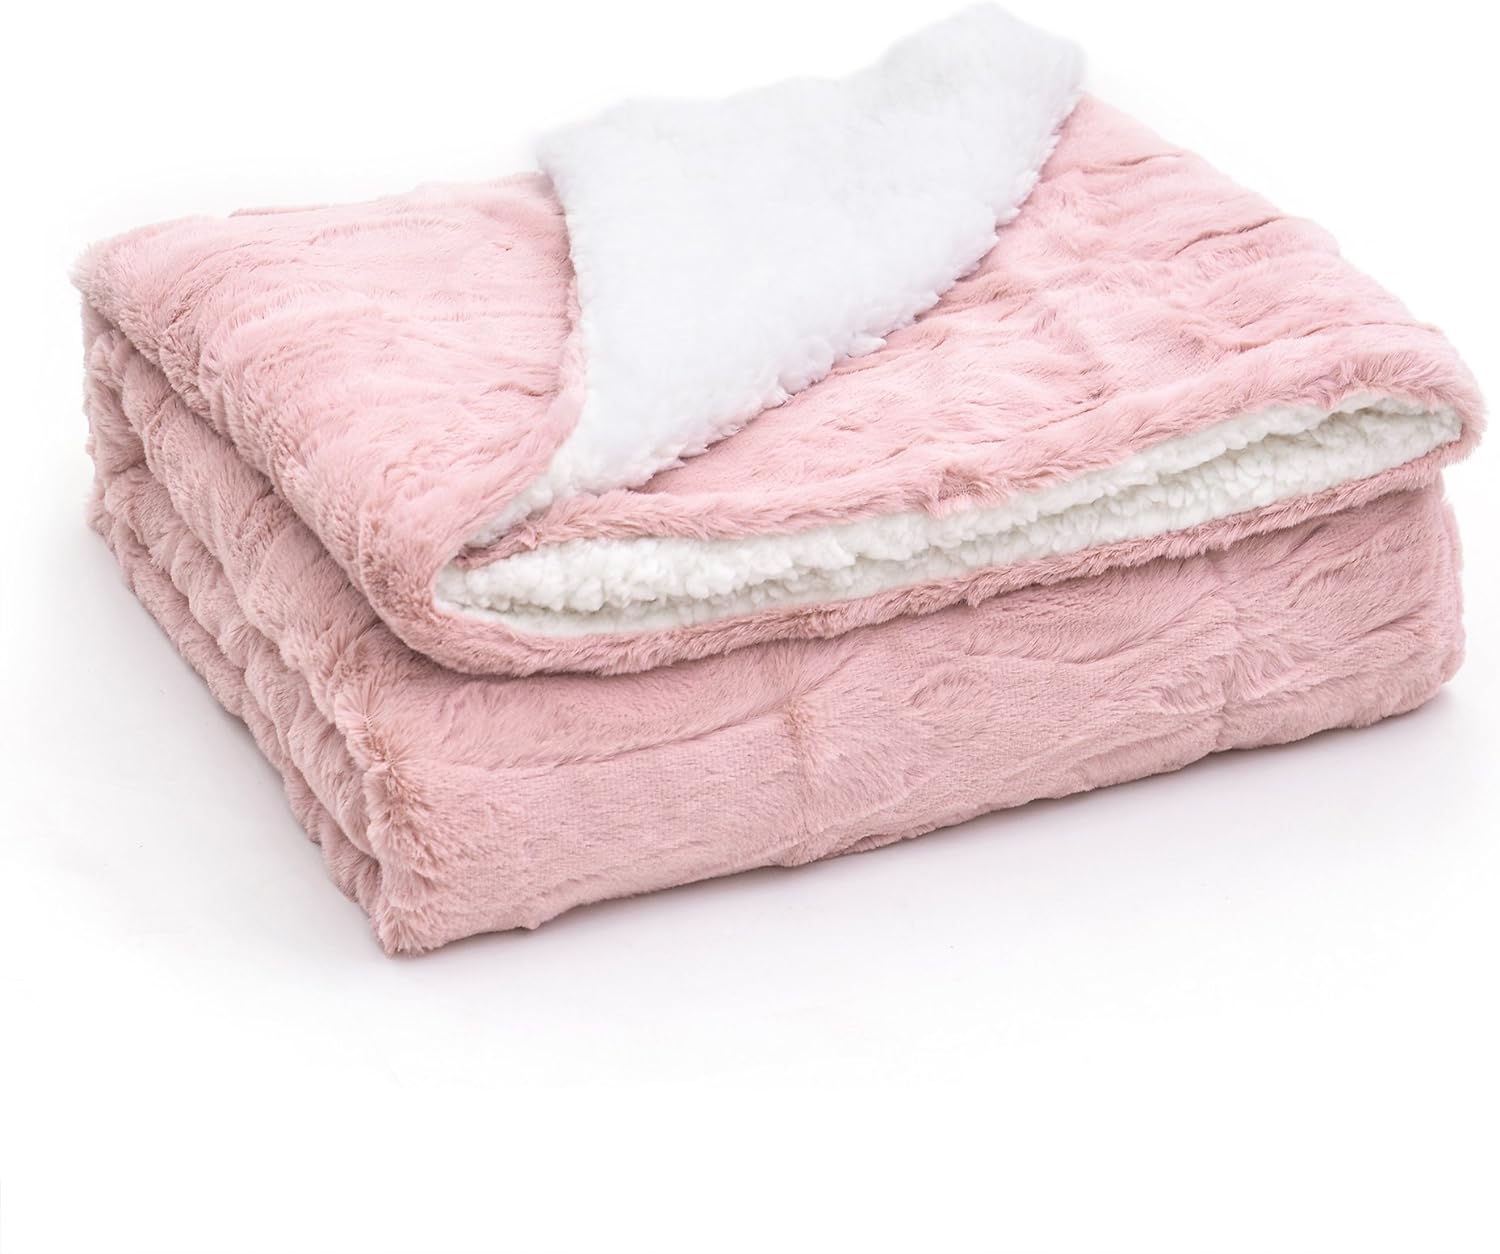 A soft rose pink faux fur blanket adds a touch of comfort